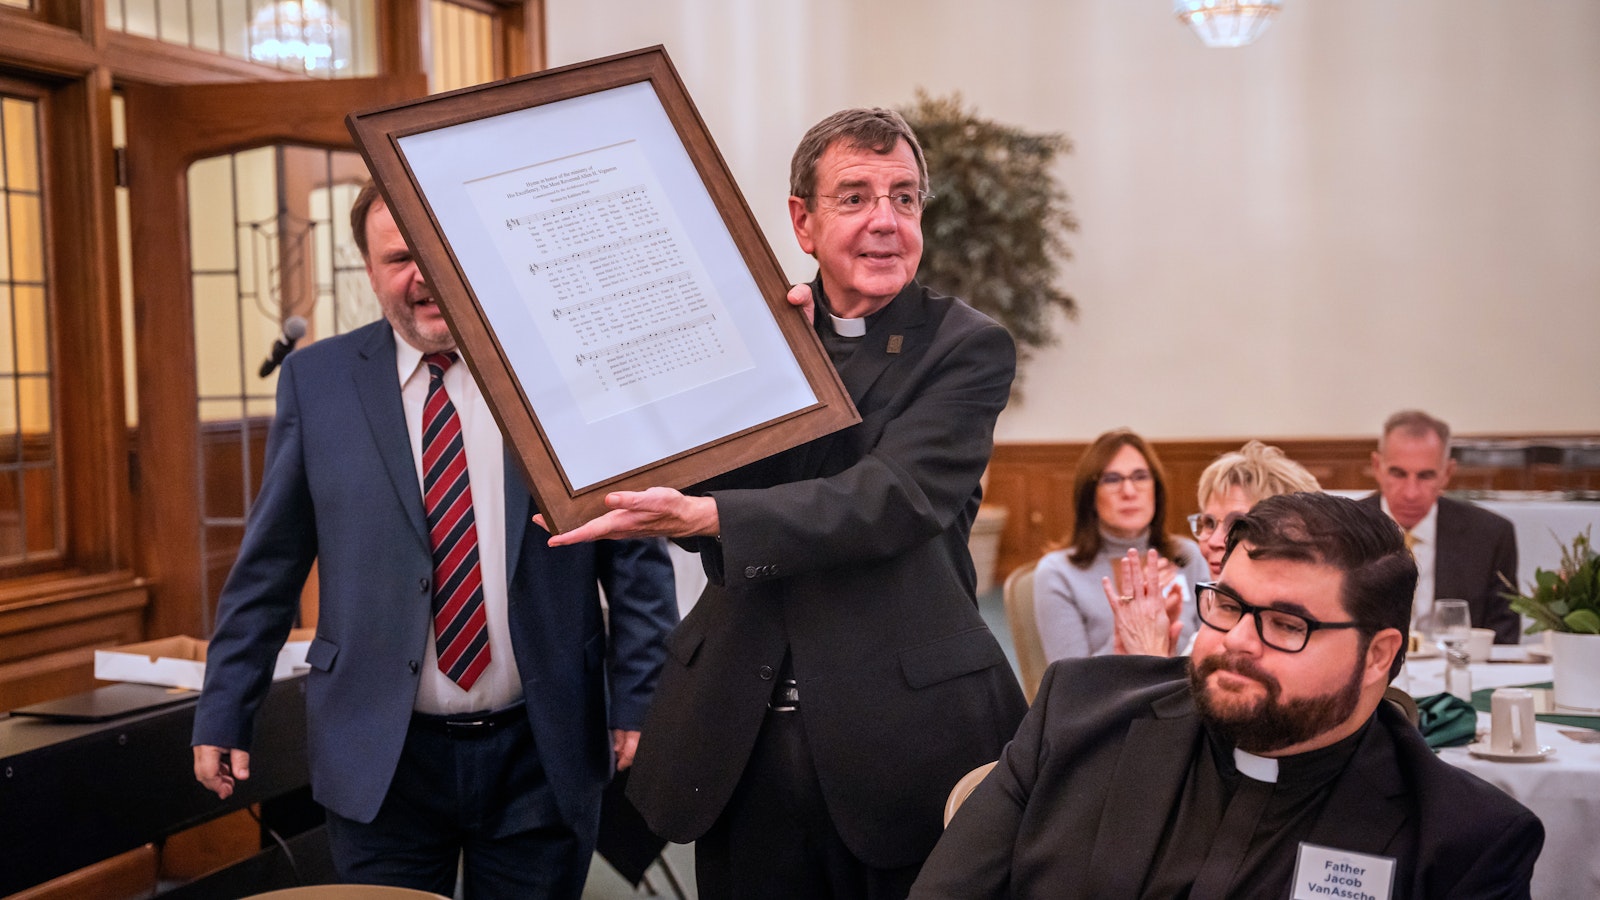 Archbishop Vigneron holds up a framed copy of a hymn written in his honor given to him as a gift Oct. 16, 2023, during a celebration of his 75th birthday. (Valaurian Waller | Detroit Catholic)